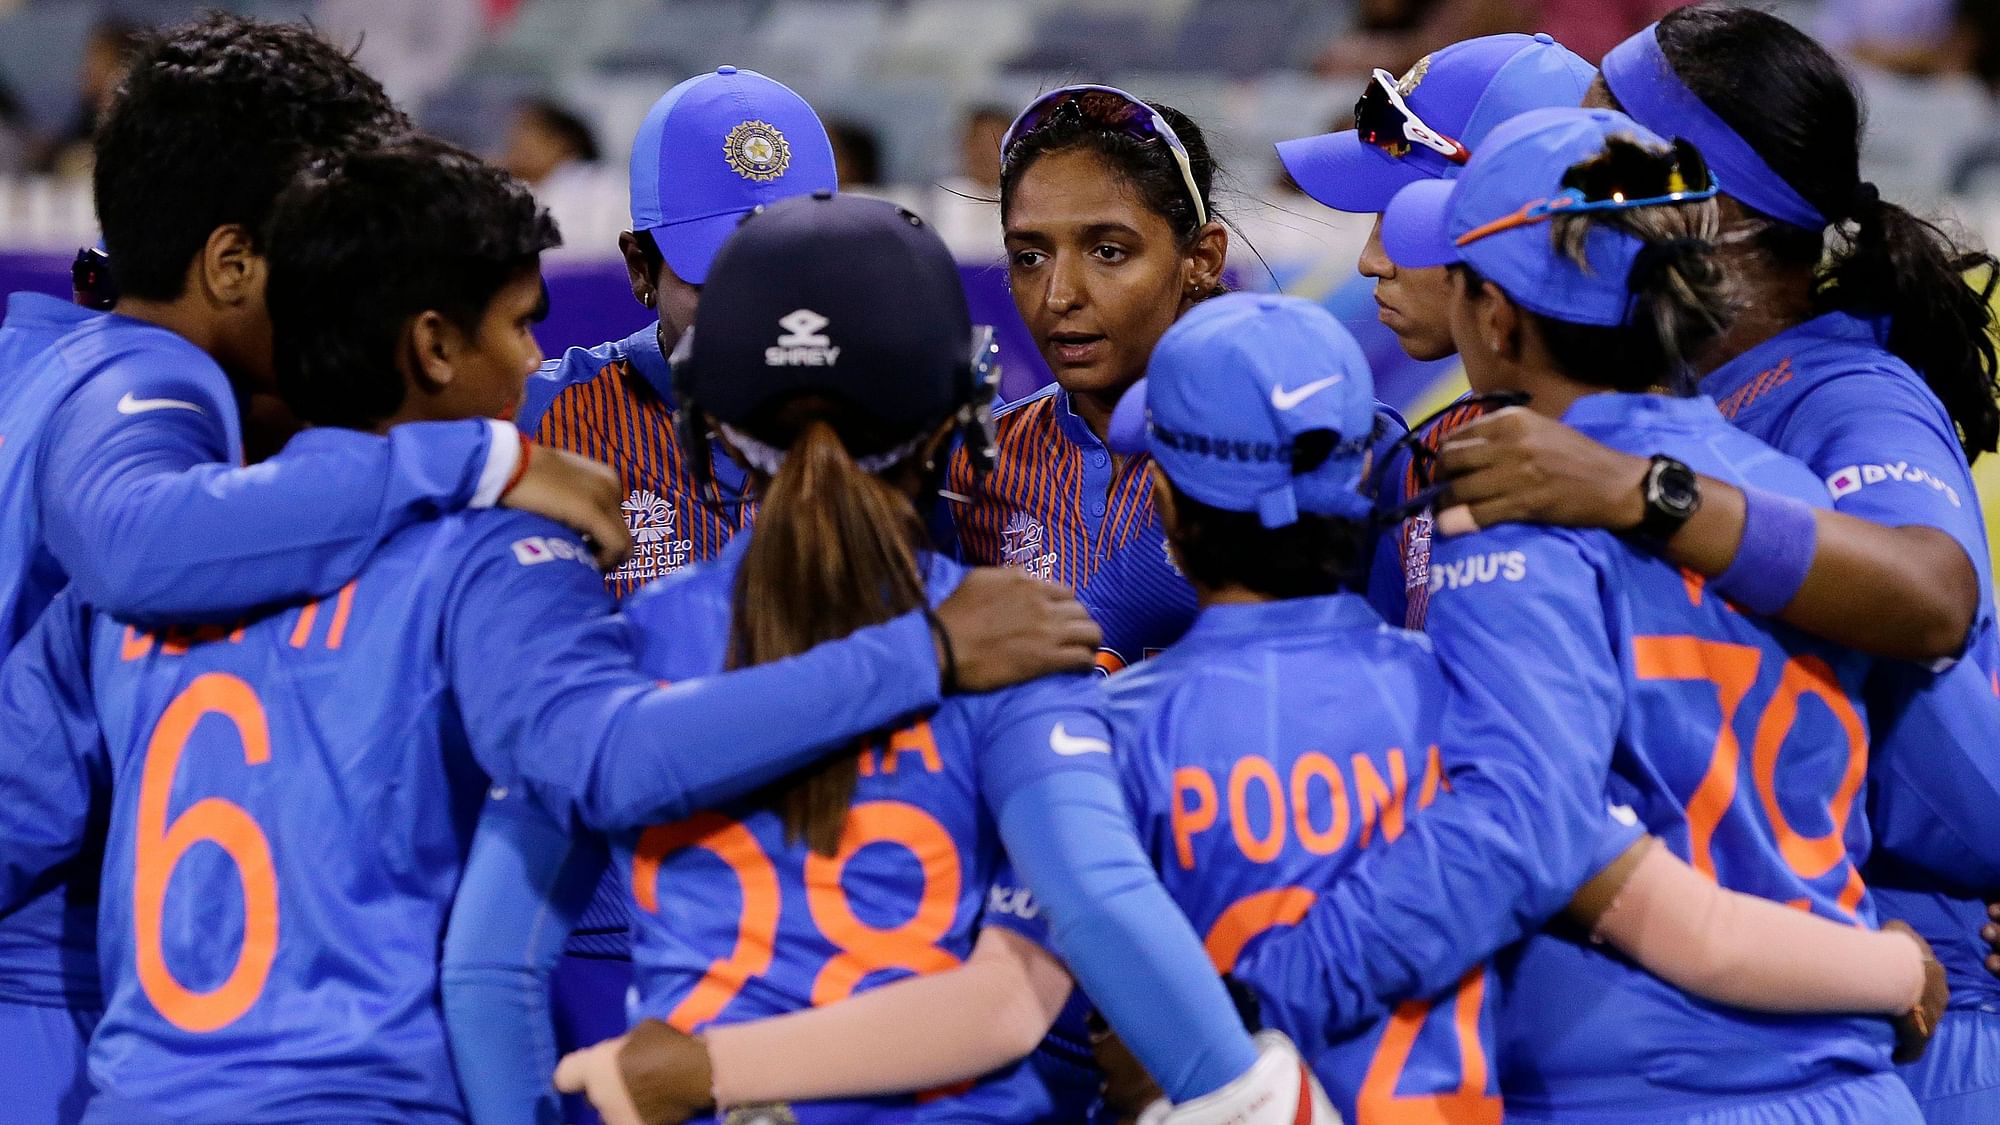 India are facing England in the first semi-final of the 2020 Women’s T20 World Cup on Thursday.